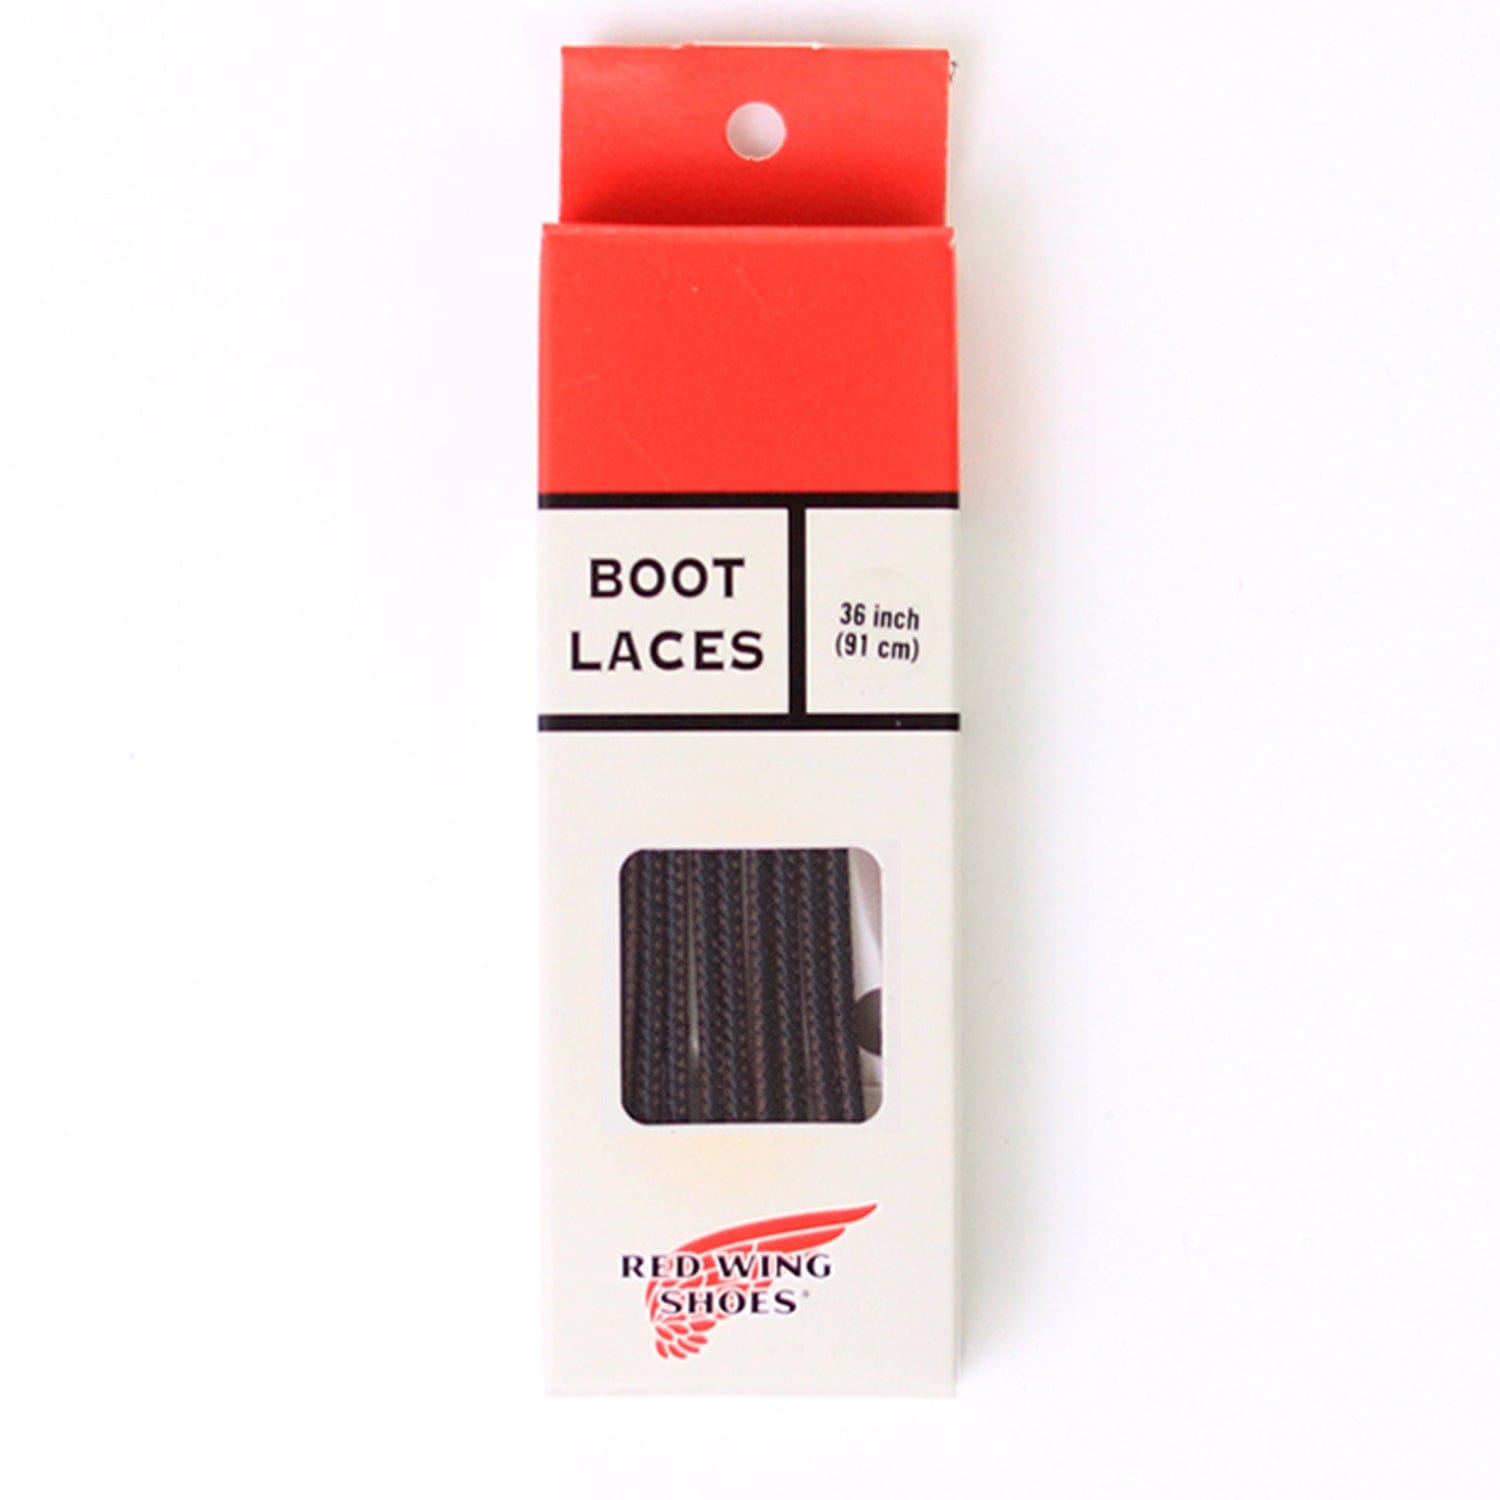 36 inch round shoelaces